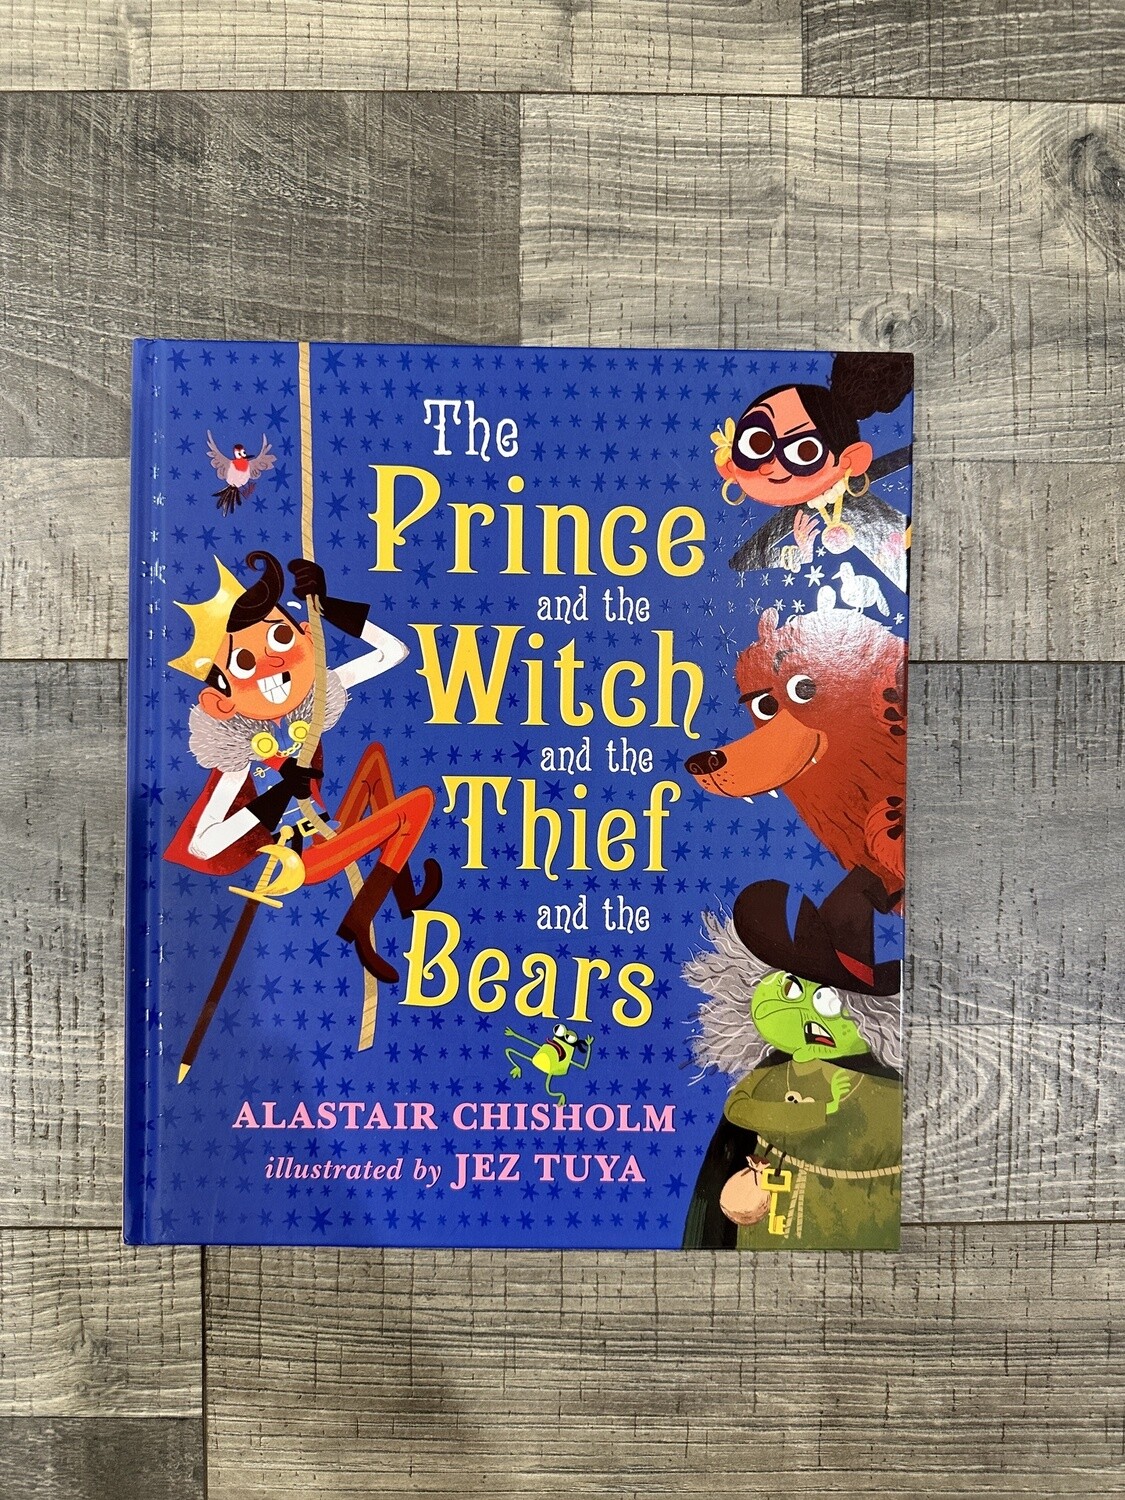 Chischolm, Alastair-The Prince, and the Witch, and the Thief, and the Bears